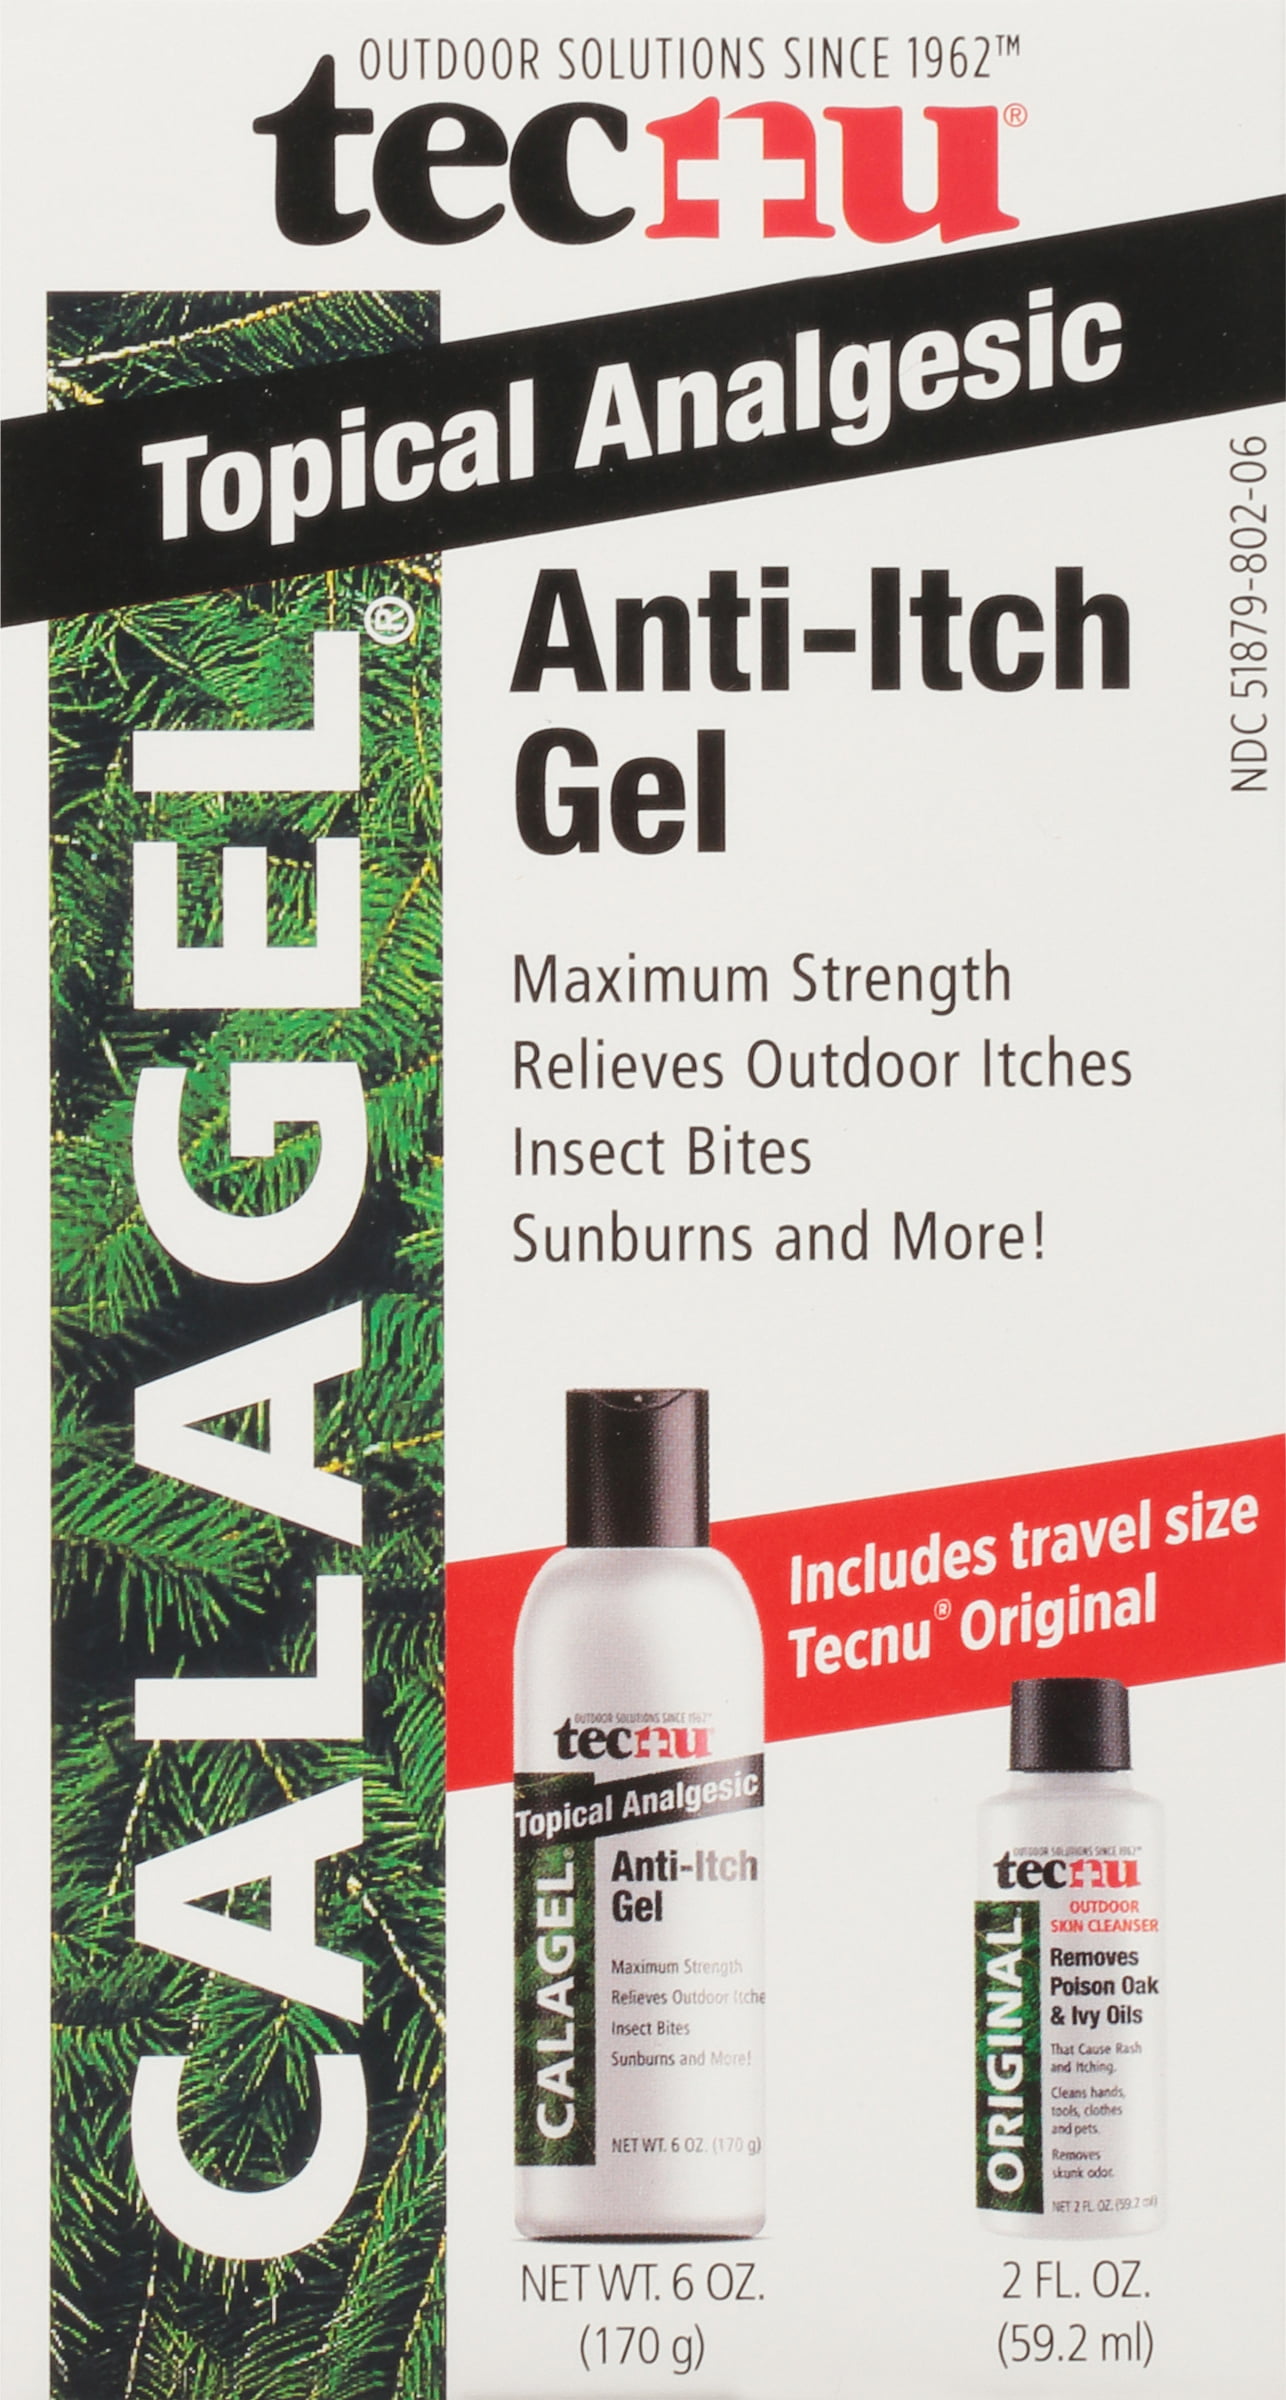 Tecnu Calagel Anti-Itch Gel Maximum Strength Itch Relief for Rashes Poison Ivy 